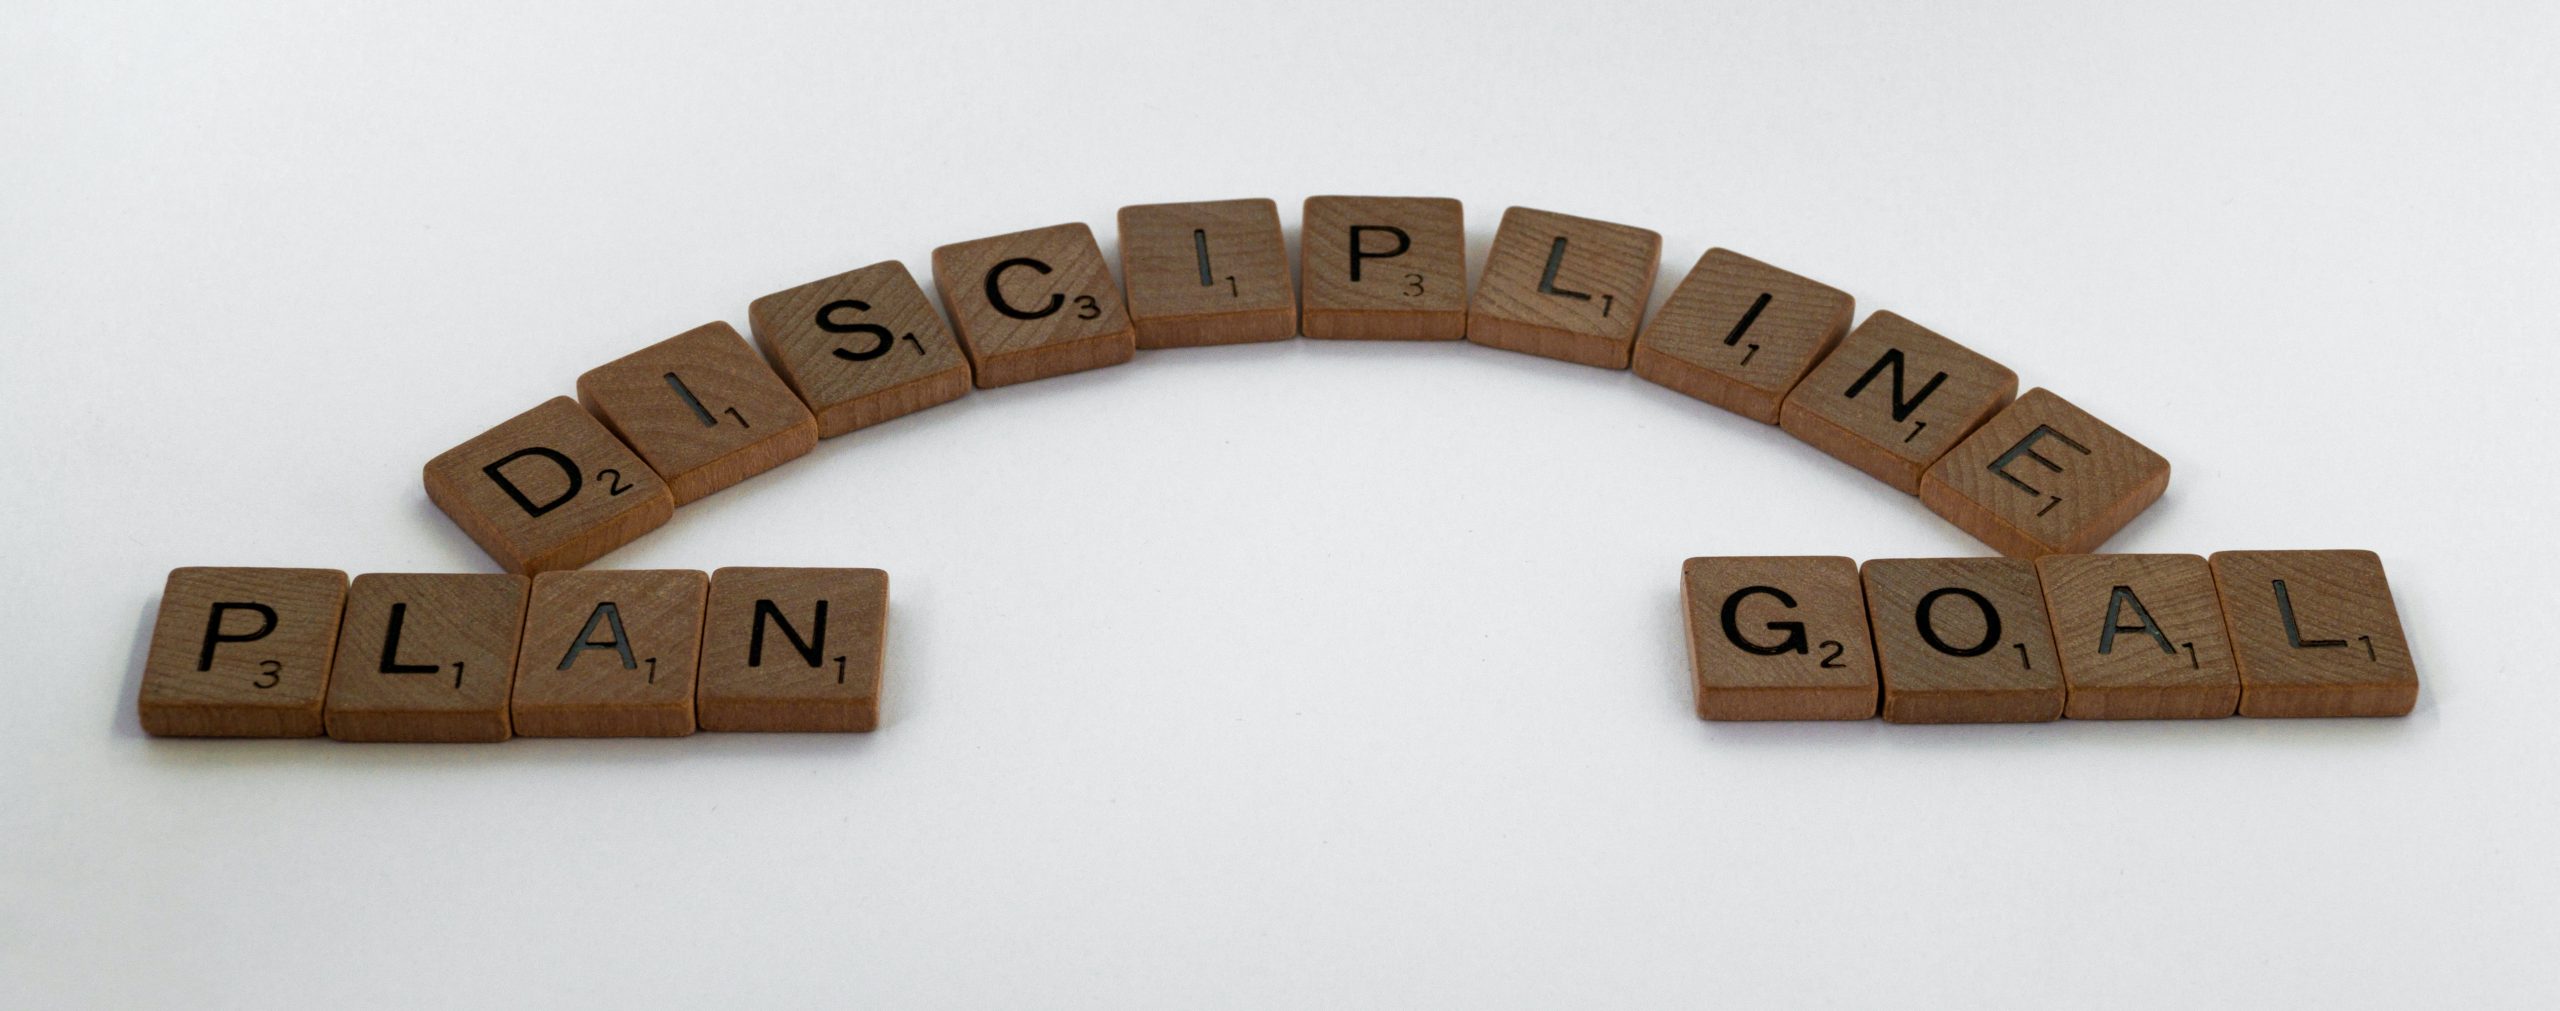 How’s your business discipline?